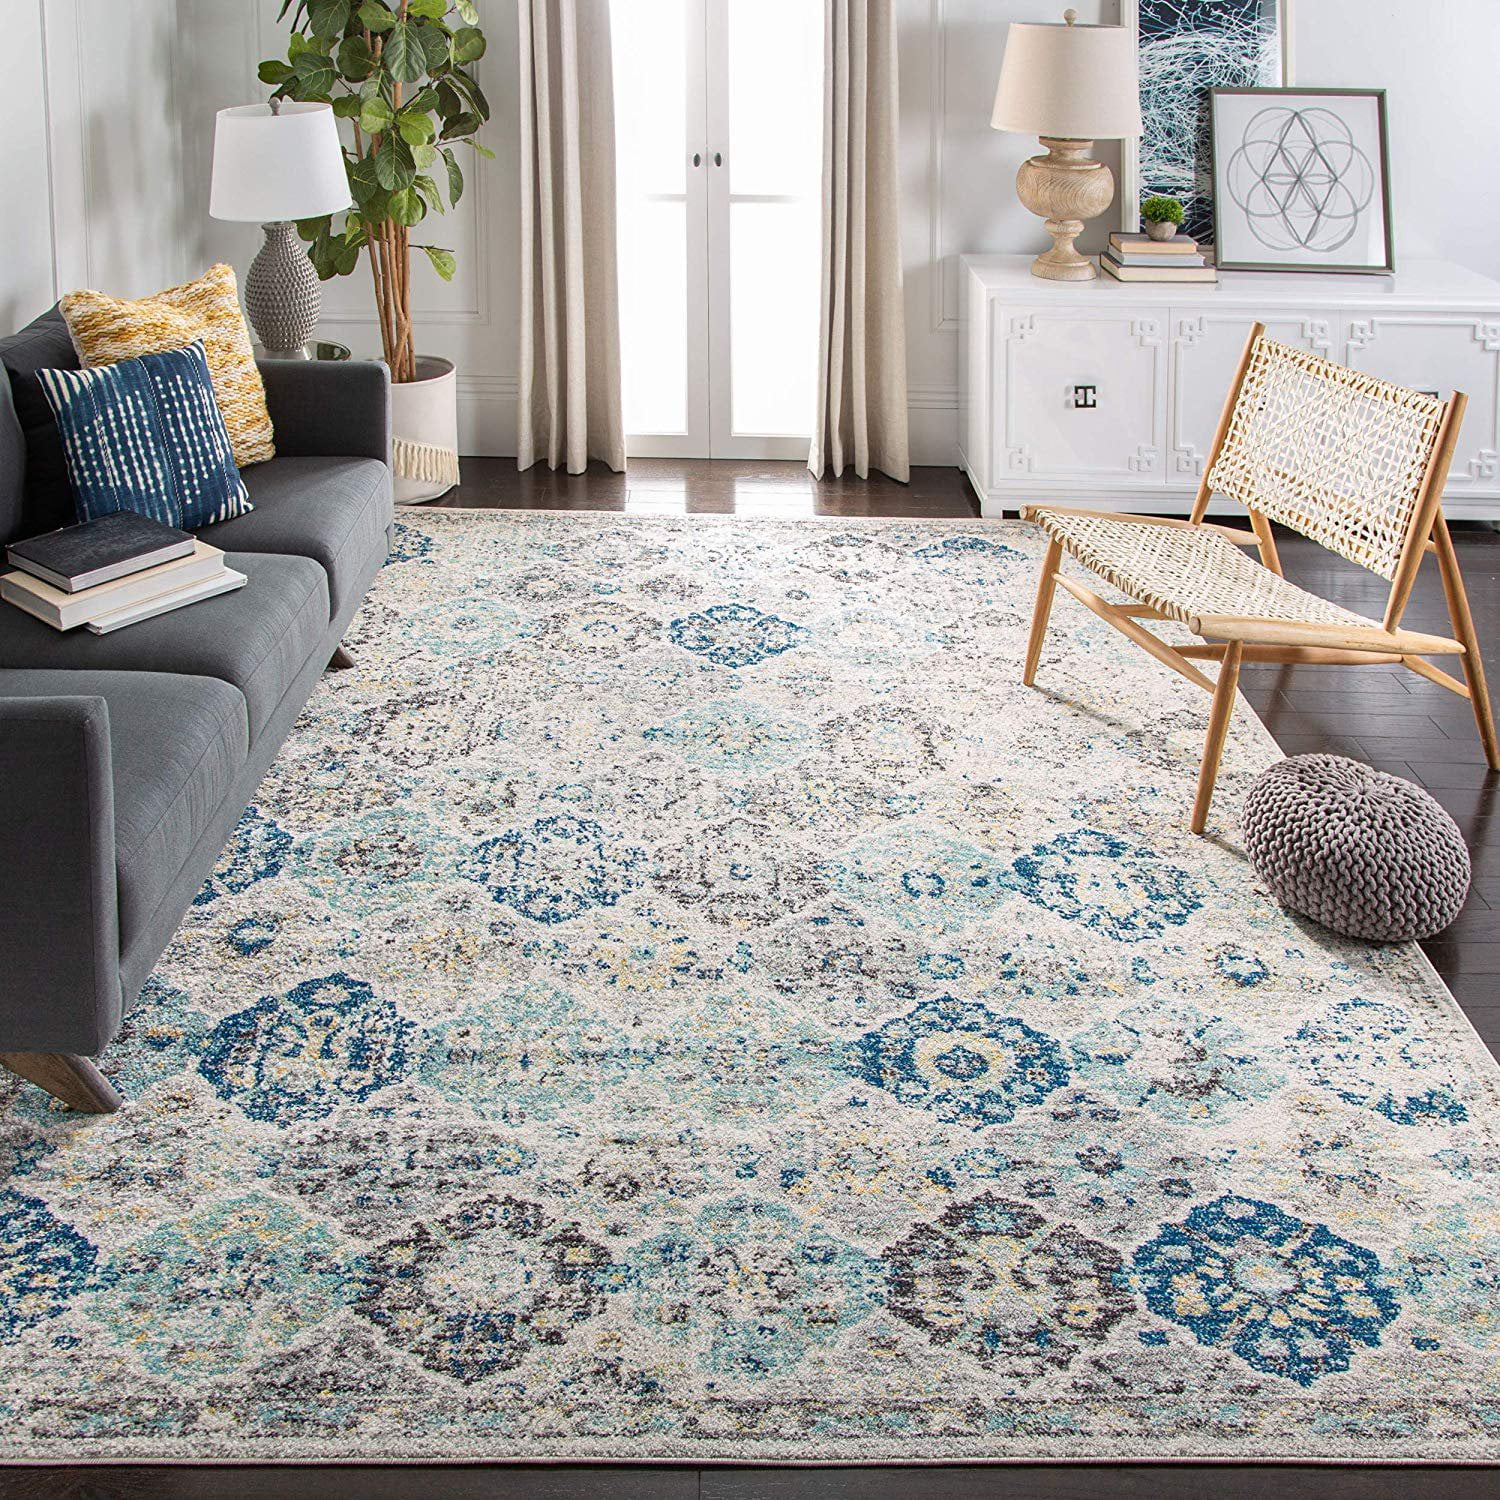 SAFAVIEH Madison Collection MAD611F Boho Chic Floral Medallion Trellis Distressed Non-Shedding Living Room Dining Bedroom Foyer Area Rug 10' x 10' Round Grey/Gold